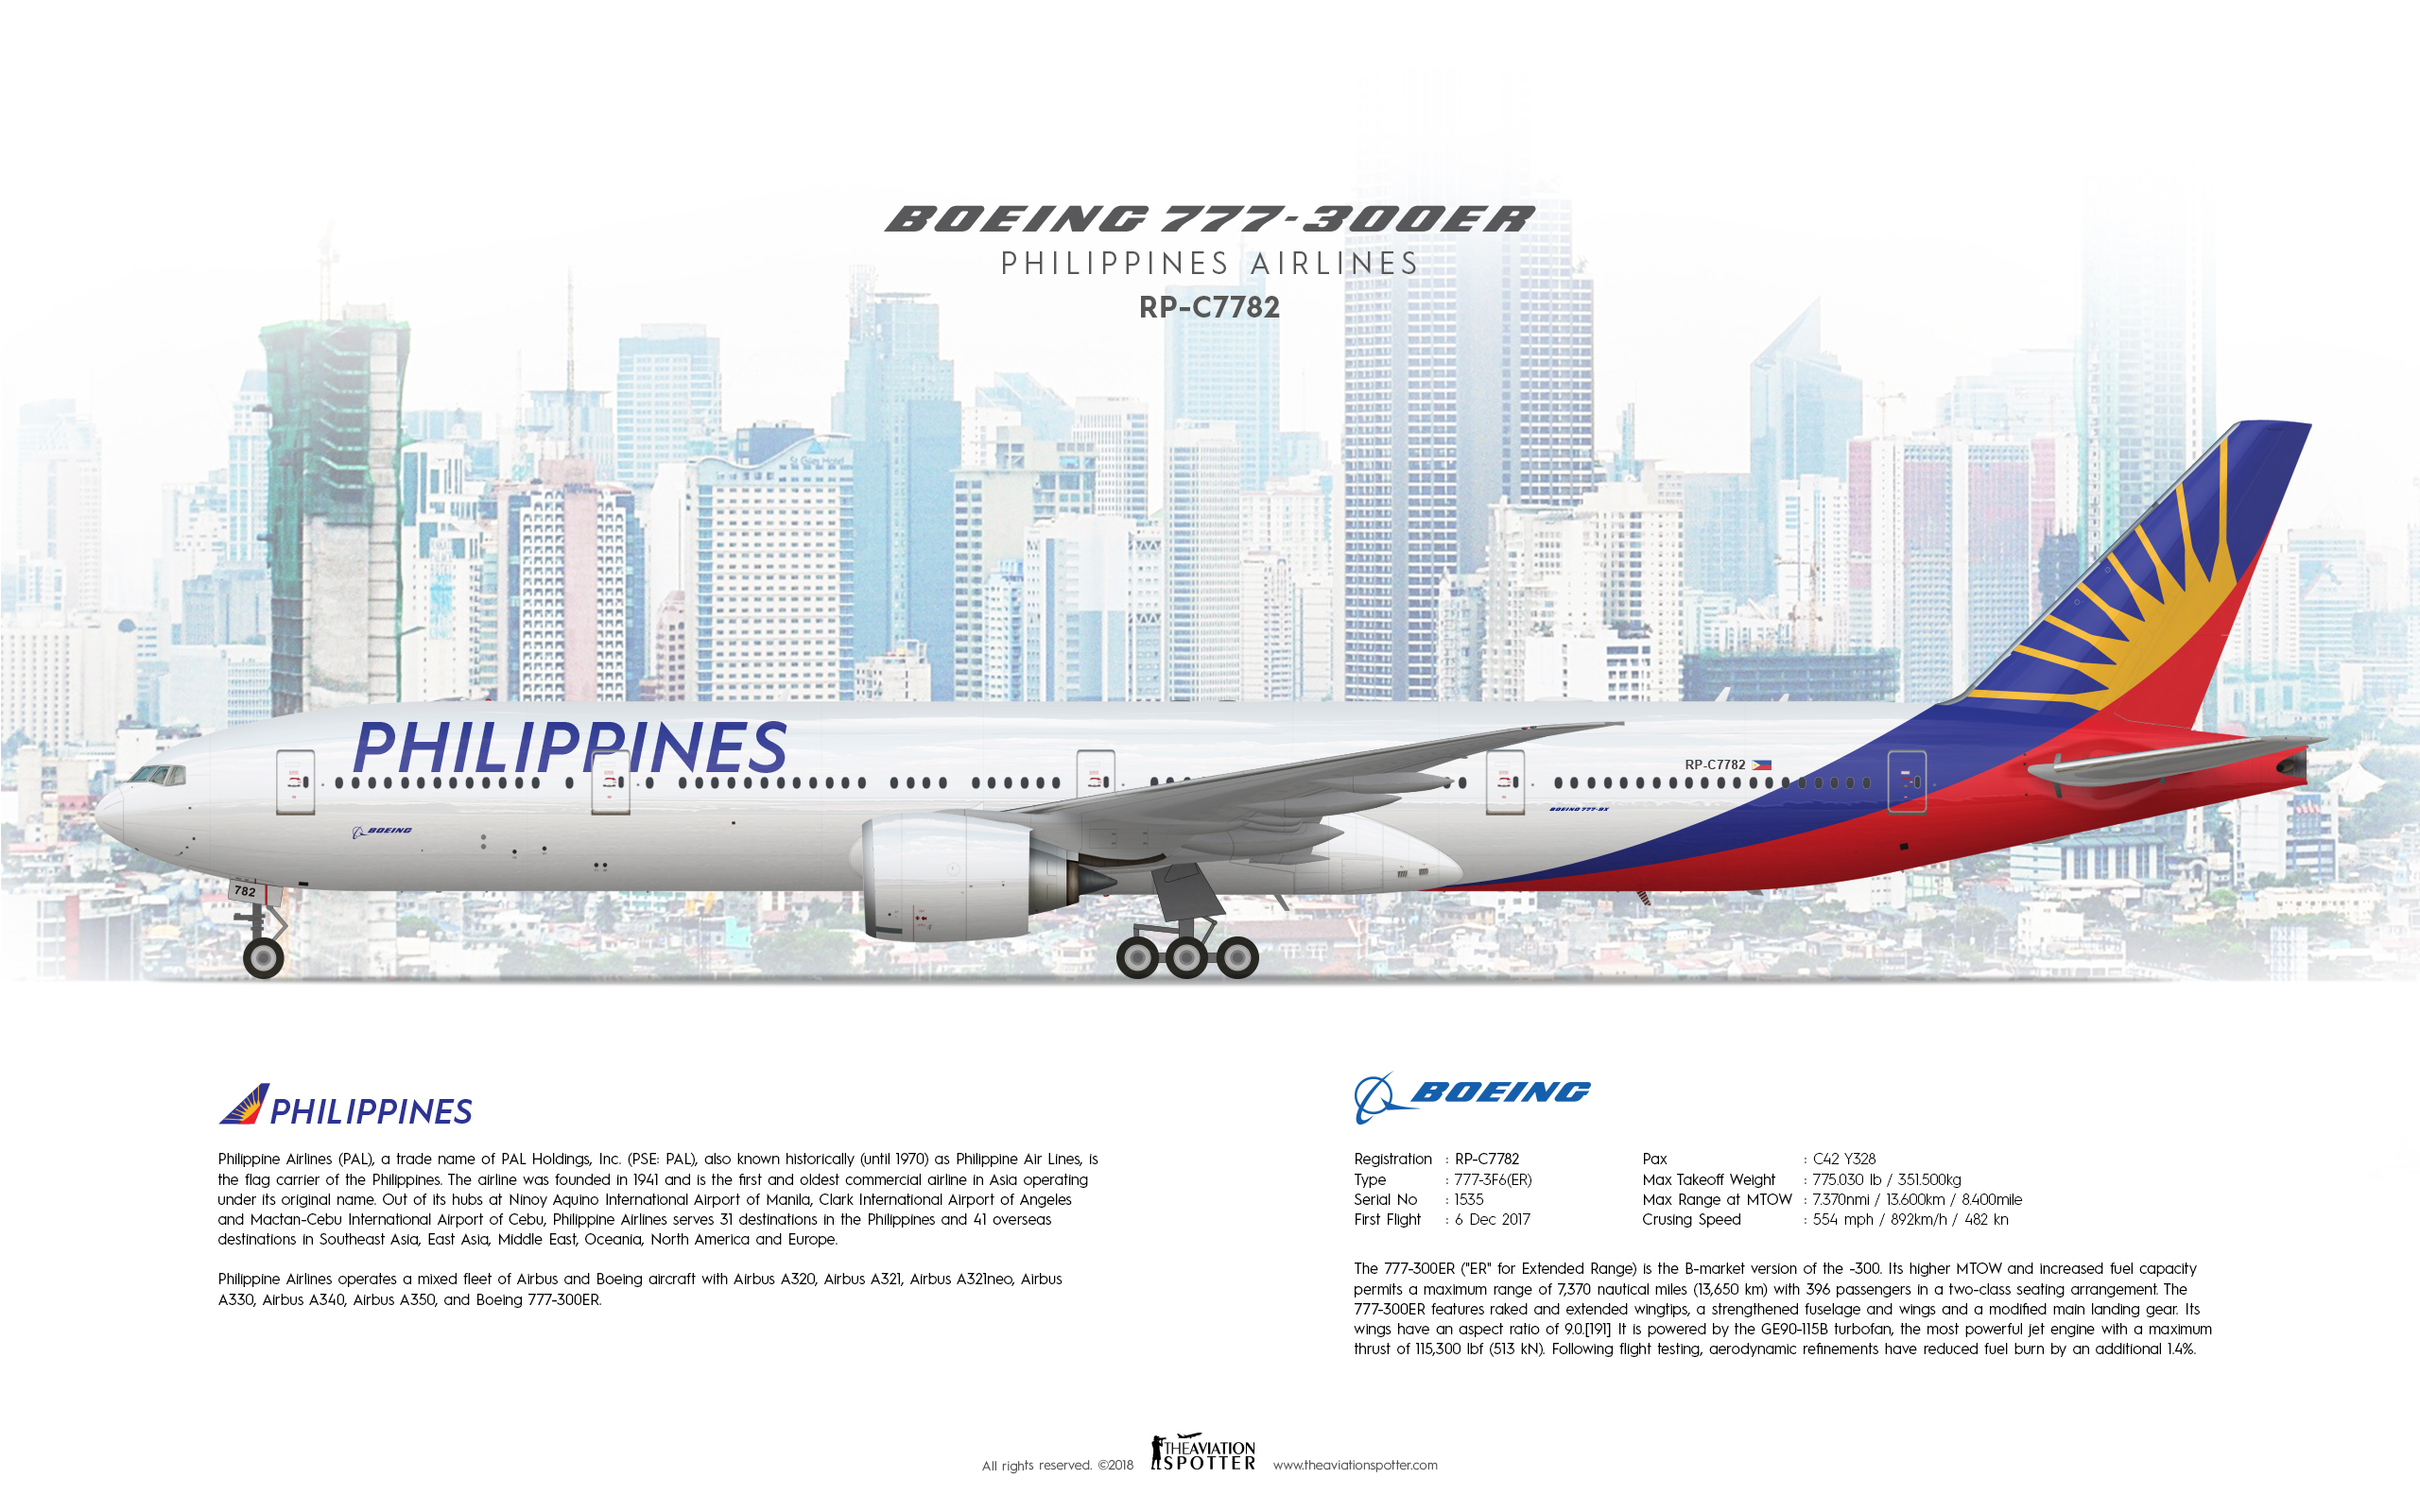 Philippine airlines boeing 777-300er seat map